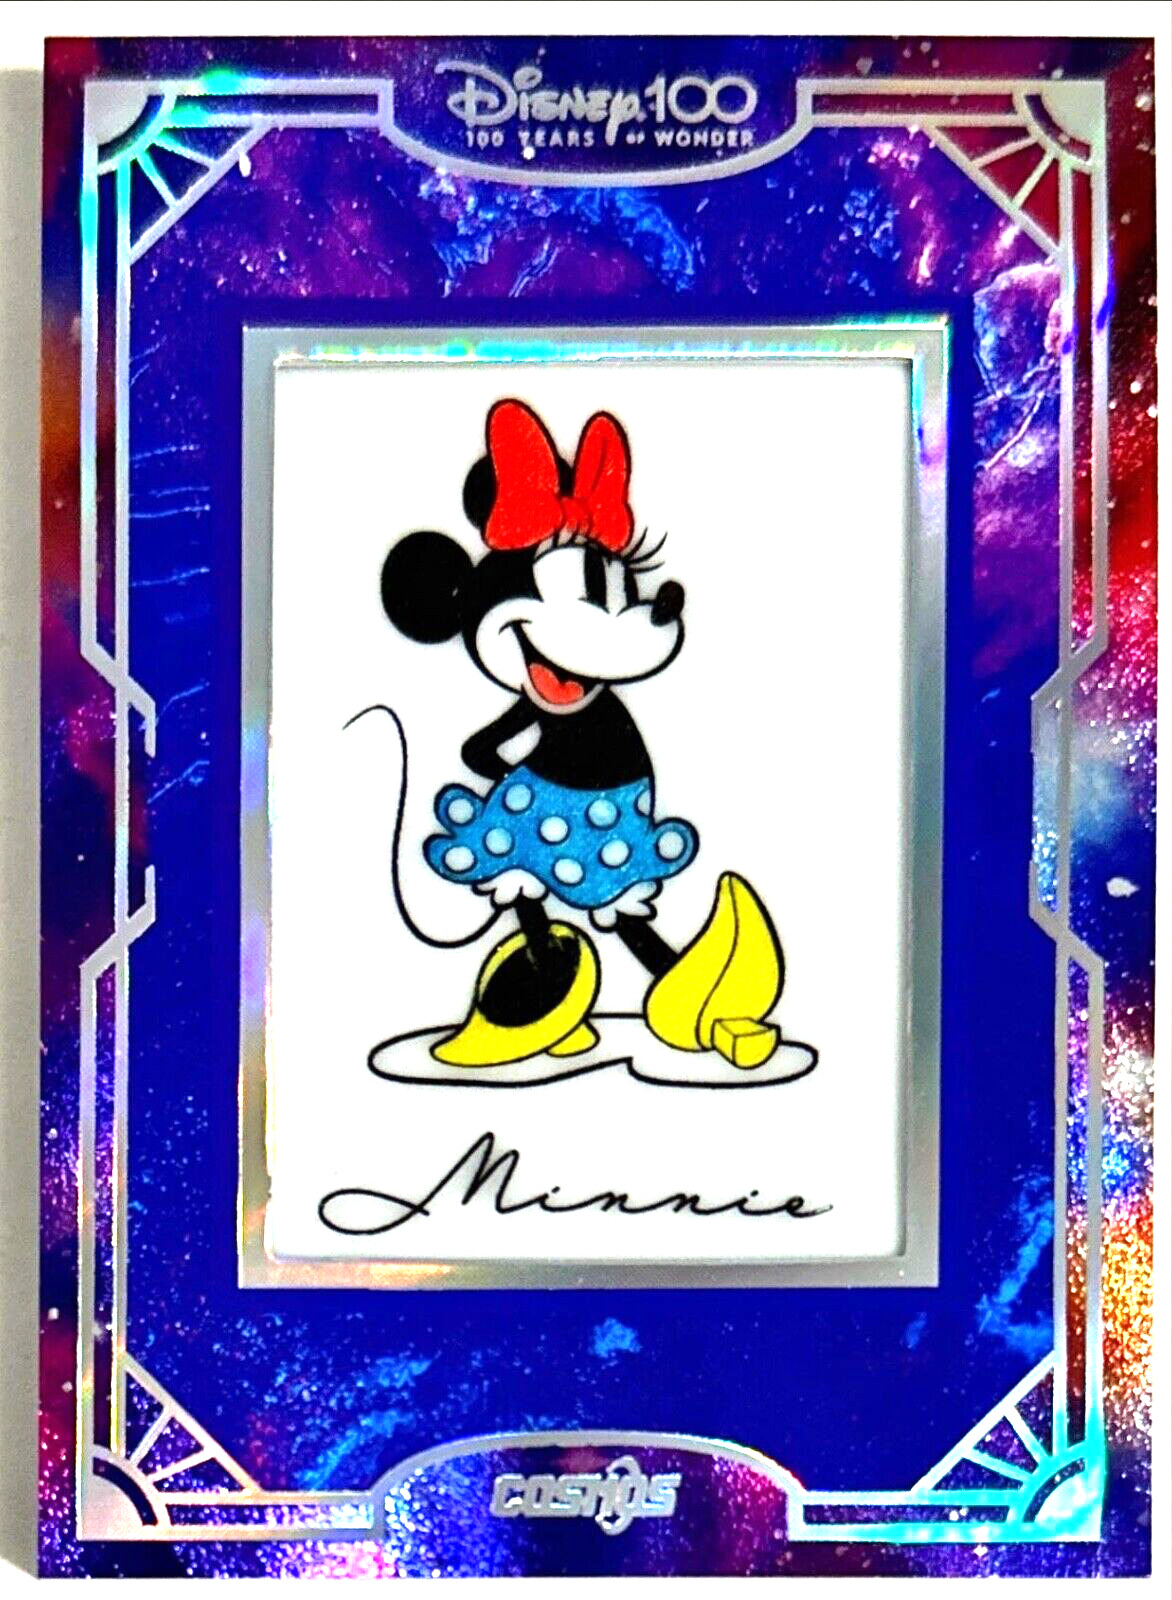 2023 Kakawow Cosmos Disney 100 Minnie Mouse #'d 97/100 Carved Porcelain 1:625